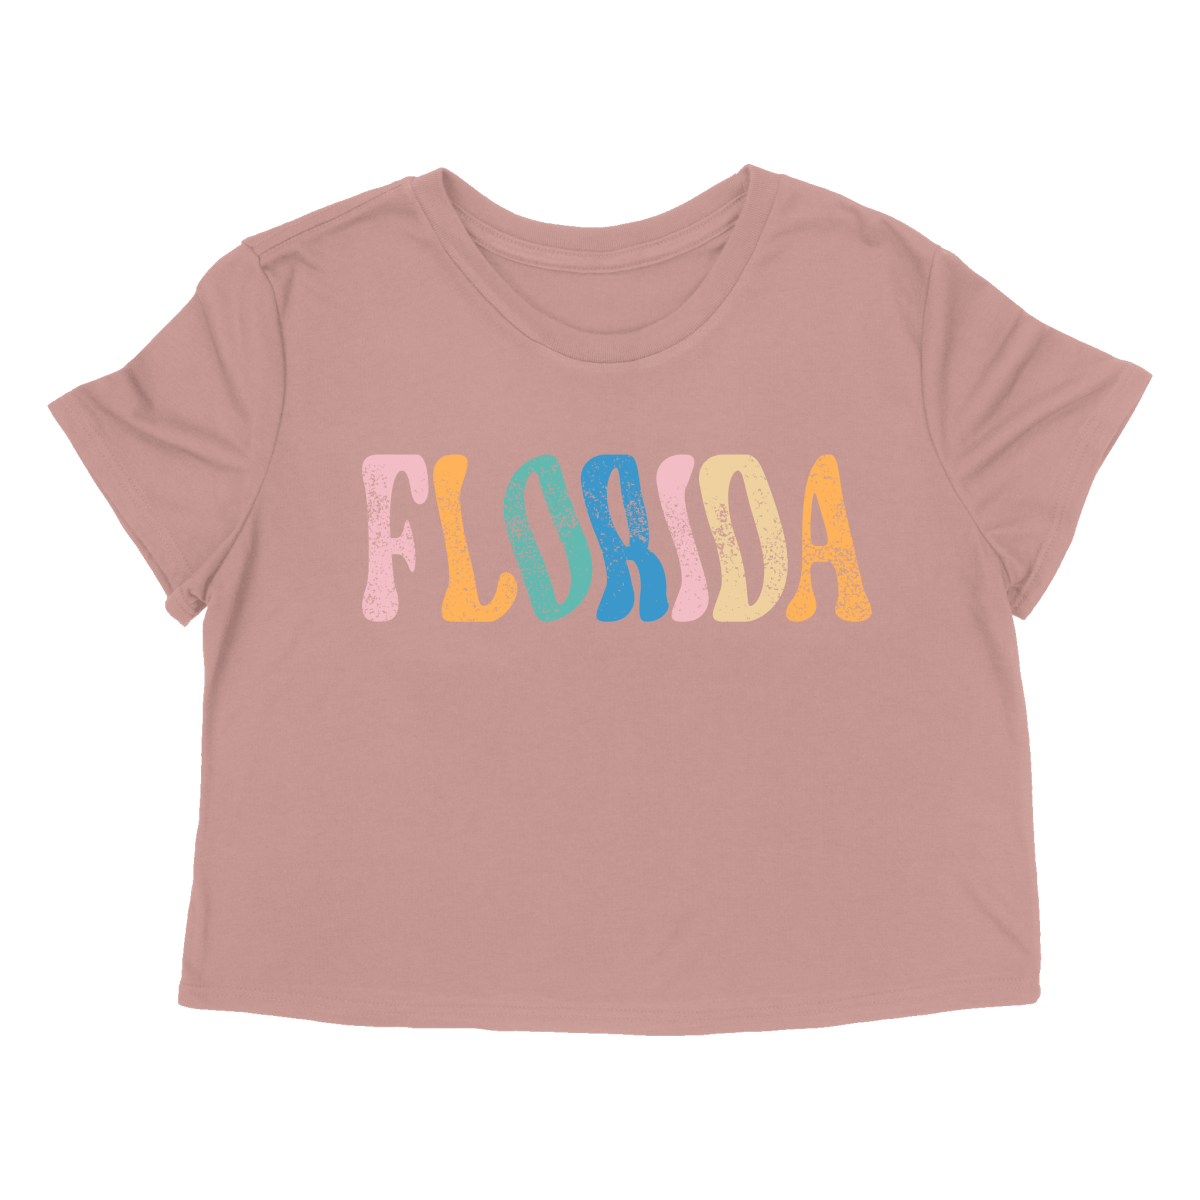 Florida In The Waves Crop Top - Shop B-Unlimited